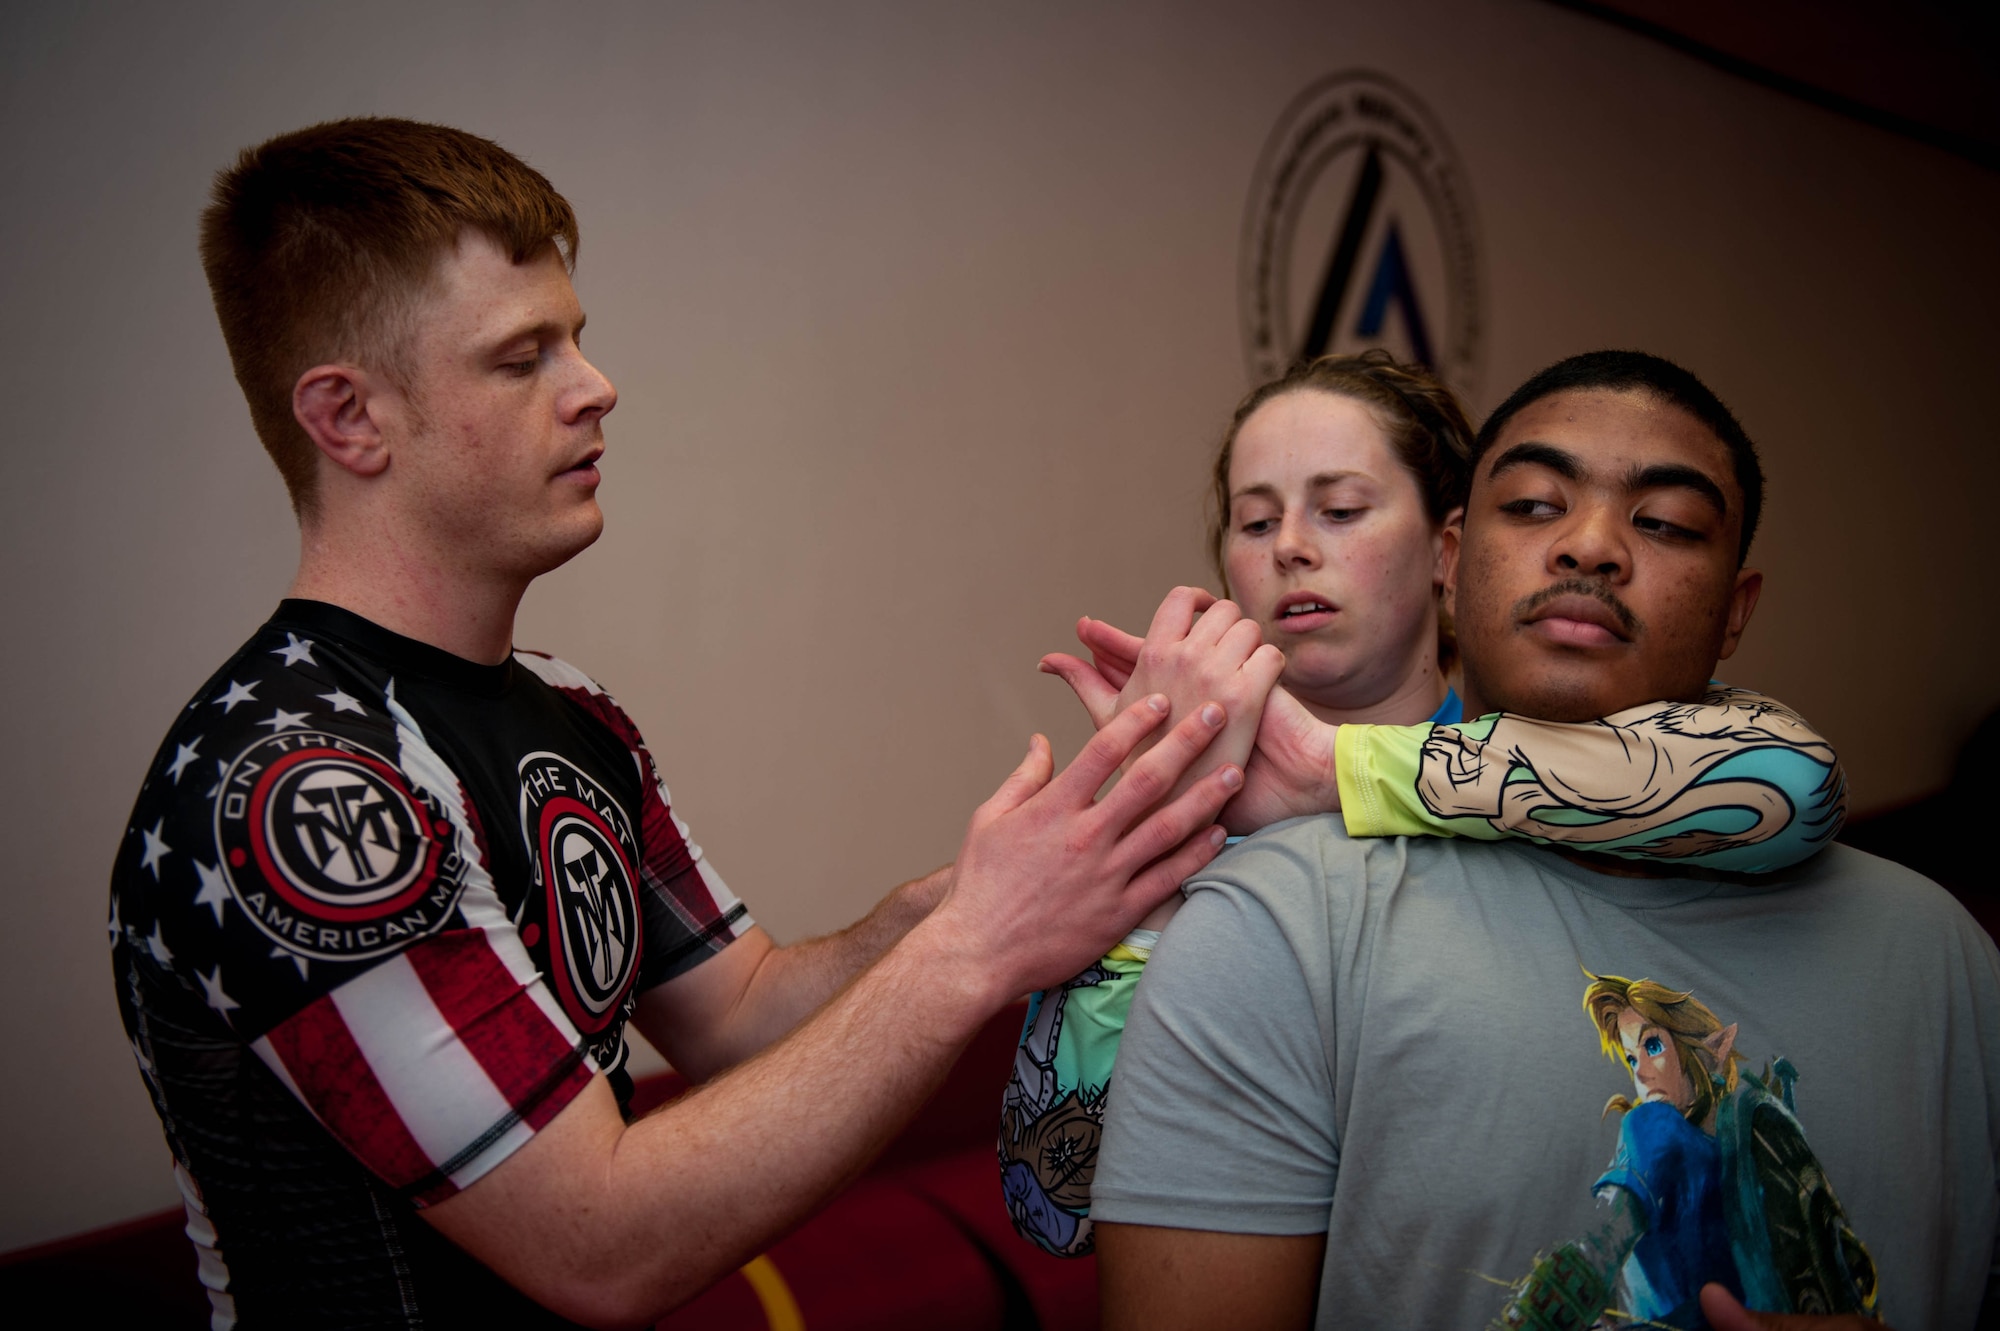 U.S. Air Force Staff Sgt. Joseph Everett, 86th Aircraft Maintenance Squadron aerospace maintenance craftsman, teaches Samantha Lamm and Senior Airman Rashid Edgington, 86th AMXS commander support staff, how to perform a move during Brazilian Jiu Jitsu training on Ramstein Air Base, Germany, April 5, 2017. Everett was showing Lamm how to secure her grip correctly to control her training partner. (U.S. Air Force photo by Senior Airman Devin Boyer/Released)